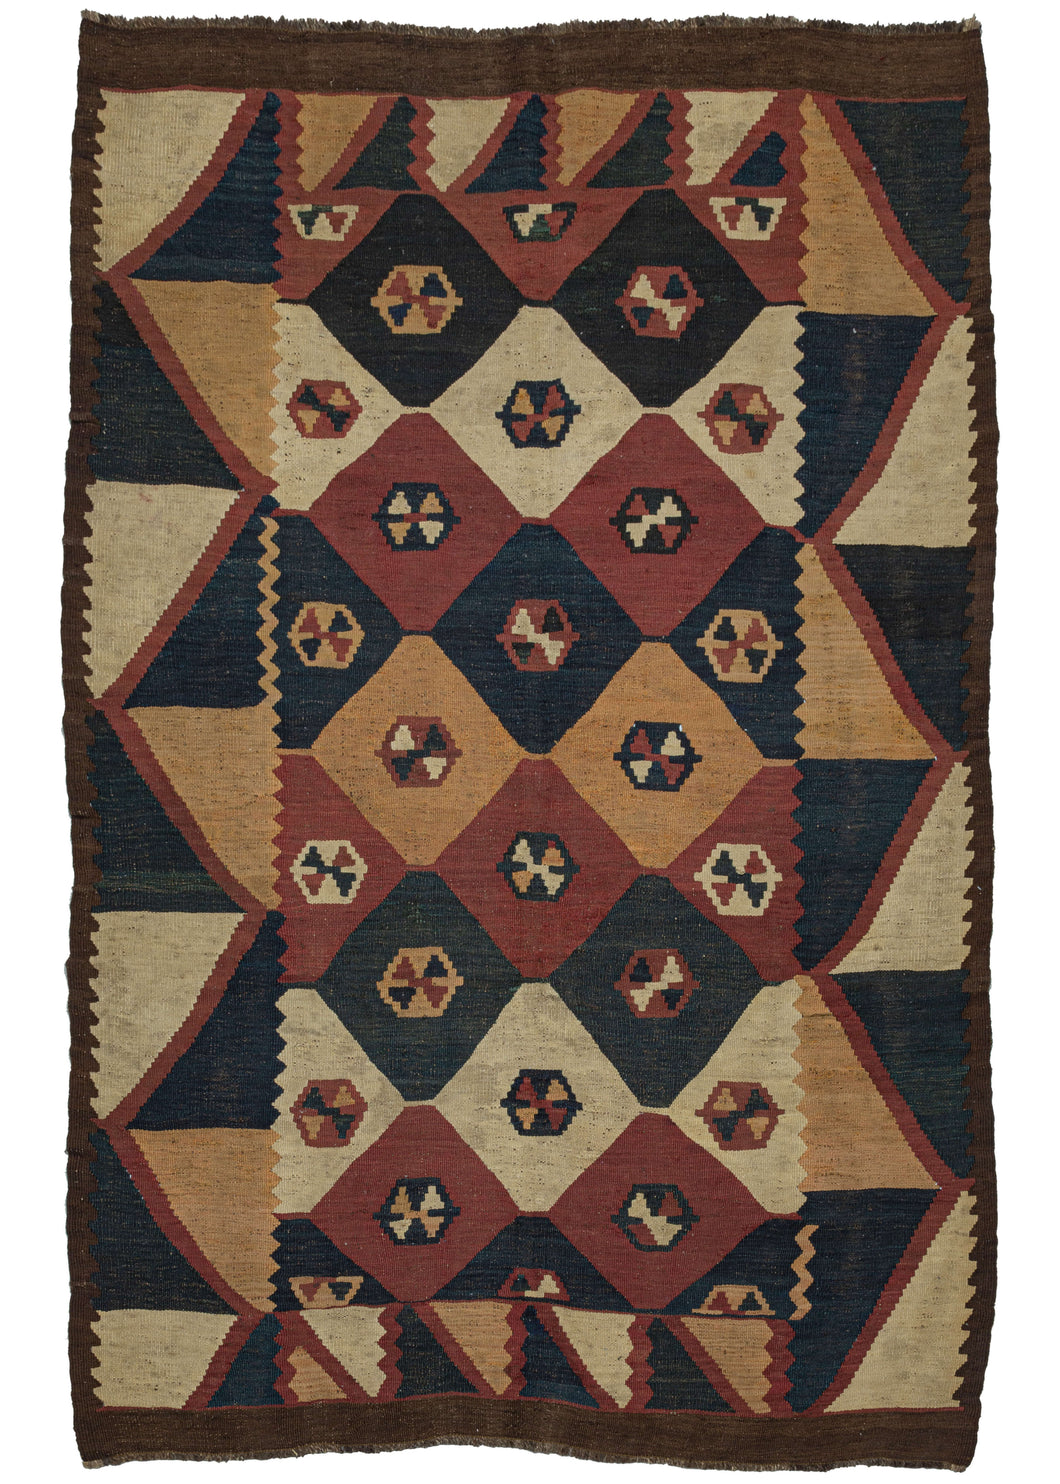 This Antique Labijar Kilim features a bold and graphic pattern of interwoven diamonds filled with saturated tones of navy, red-orange, or ivory.  Each diamond contains a small polygon with a central 